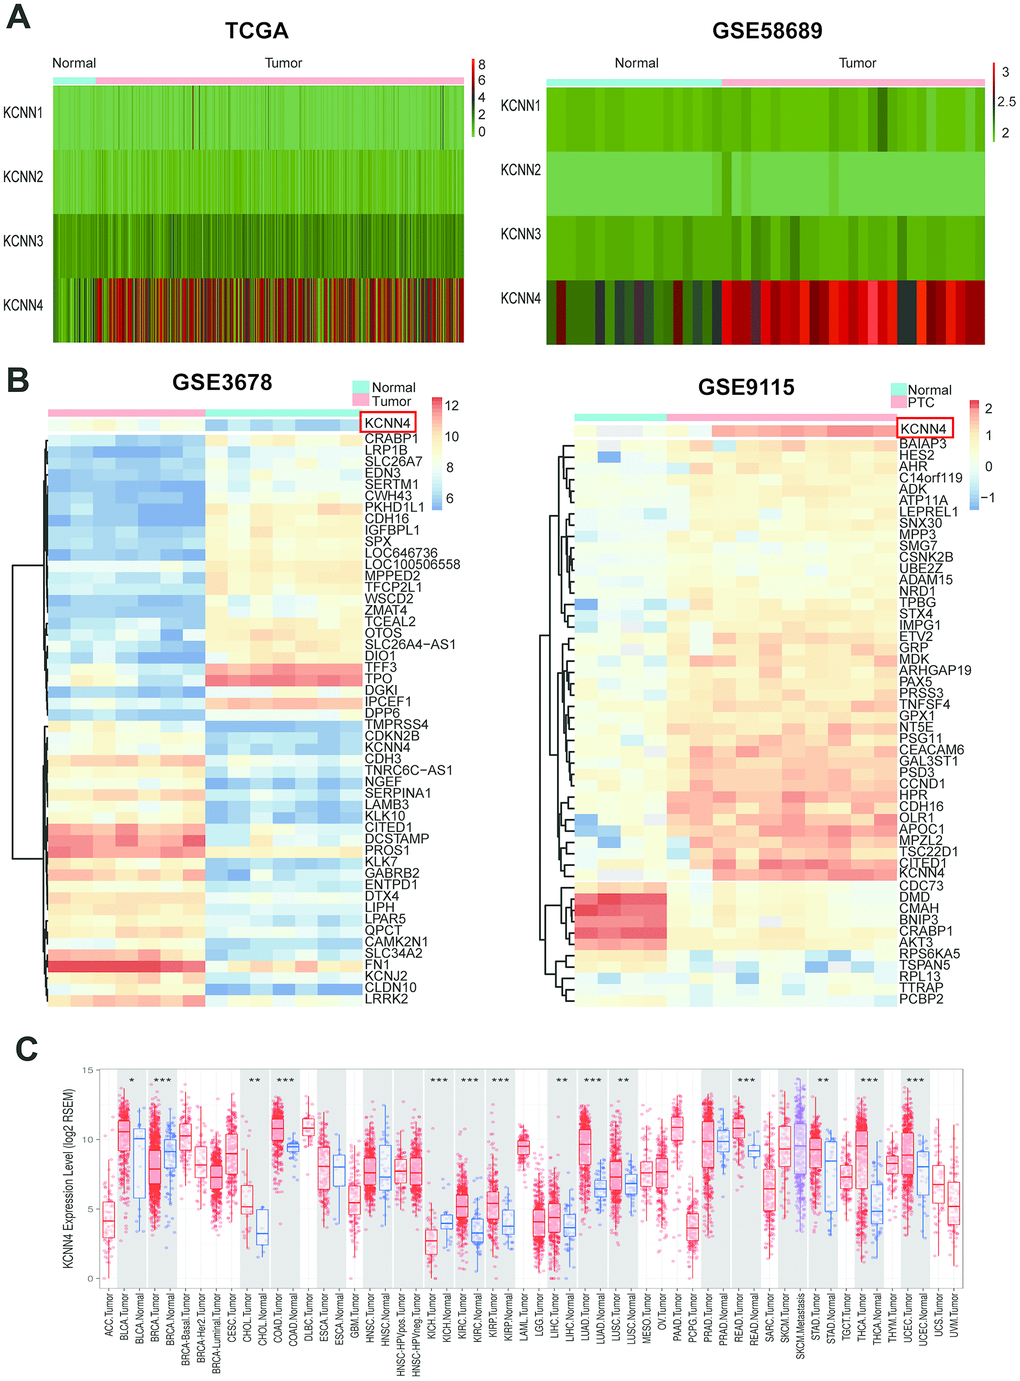 KCNN4 was differentially expressed in PTC and most other cancers. (A) The expression of the KCNN family in PTC was assessed using data from TCGA and GSE58689. (B) Heatmap of the top 50 significantly differentially expressed genes in GSE3678 and GSE9115, based on the adjusted p-value. (C) KCNN4 was overexpressed in multiple cancers in TCGA. The statistical significance of differential expression was evaluated using the Wilcoxon test. *ppp